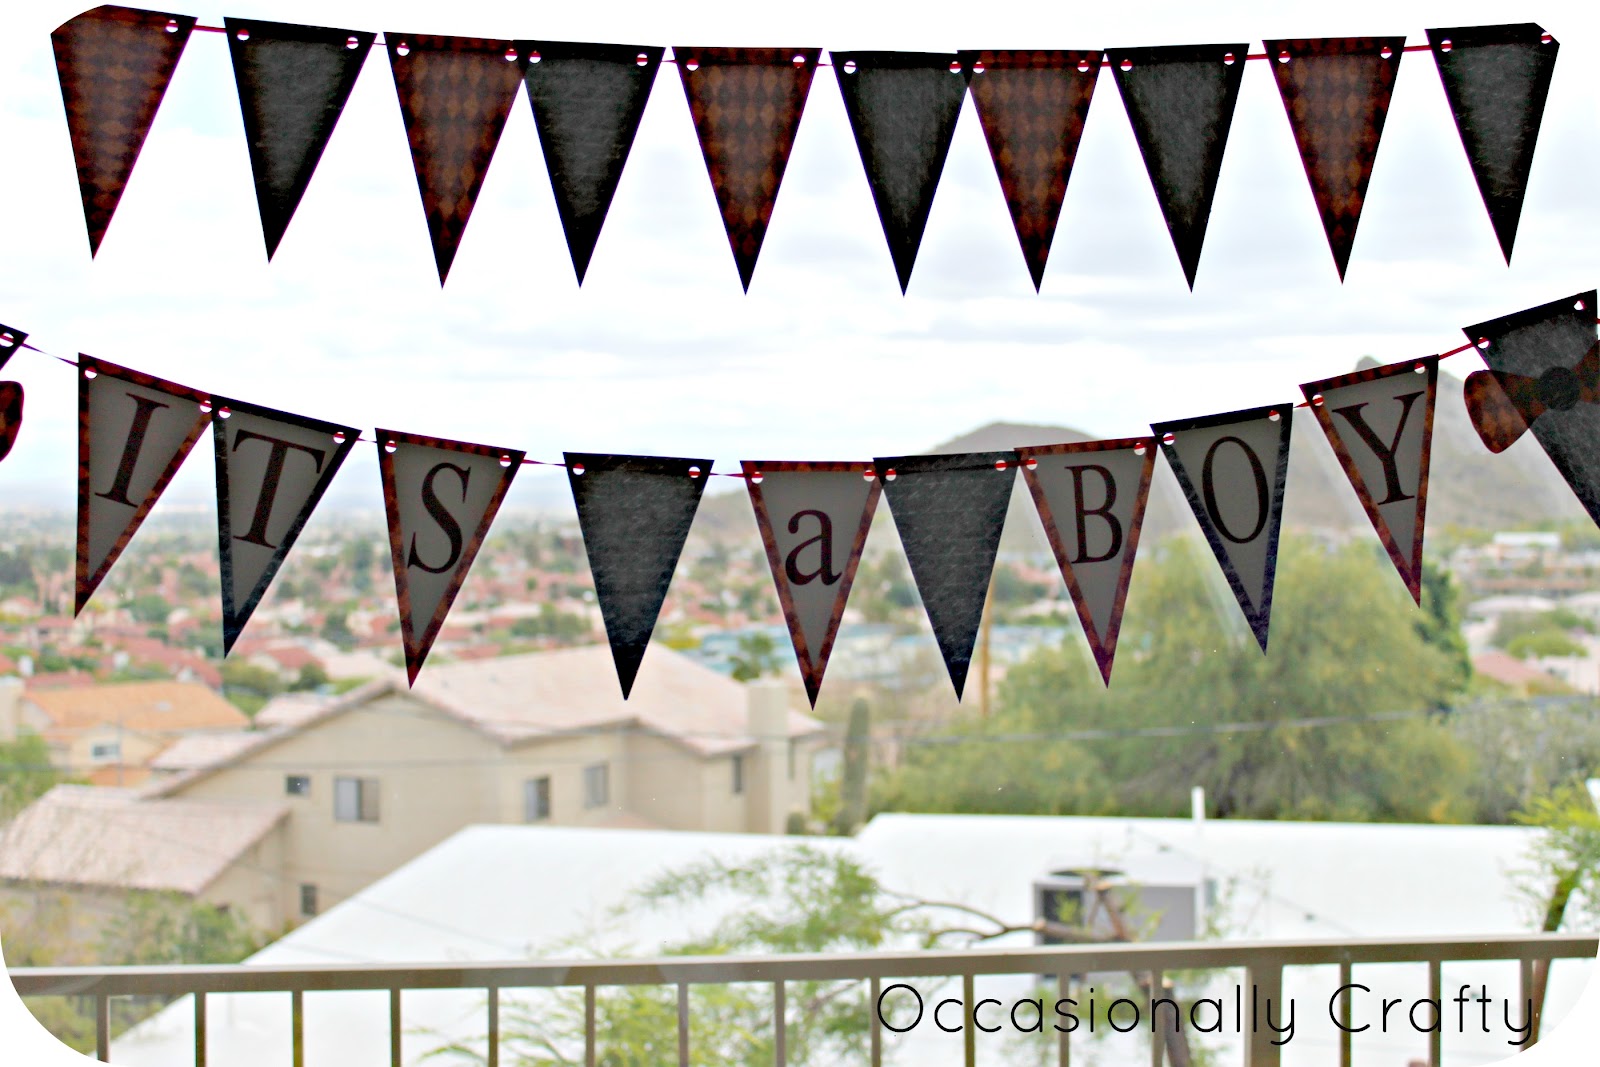 Bow Tie Baby Shower | Occasionally Crafty: Bow Tie Baby Shower